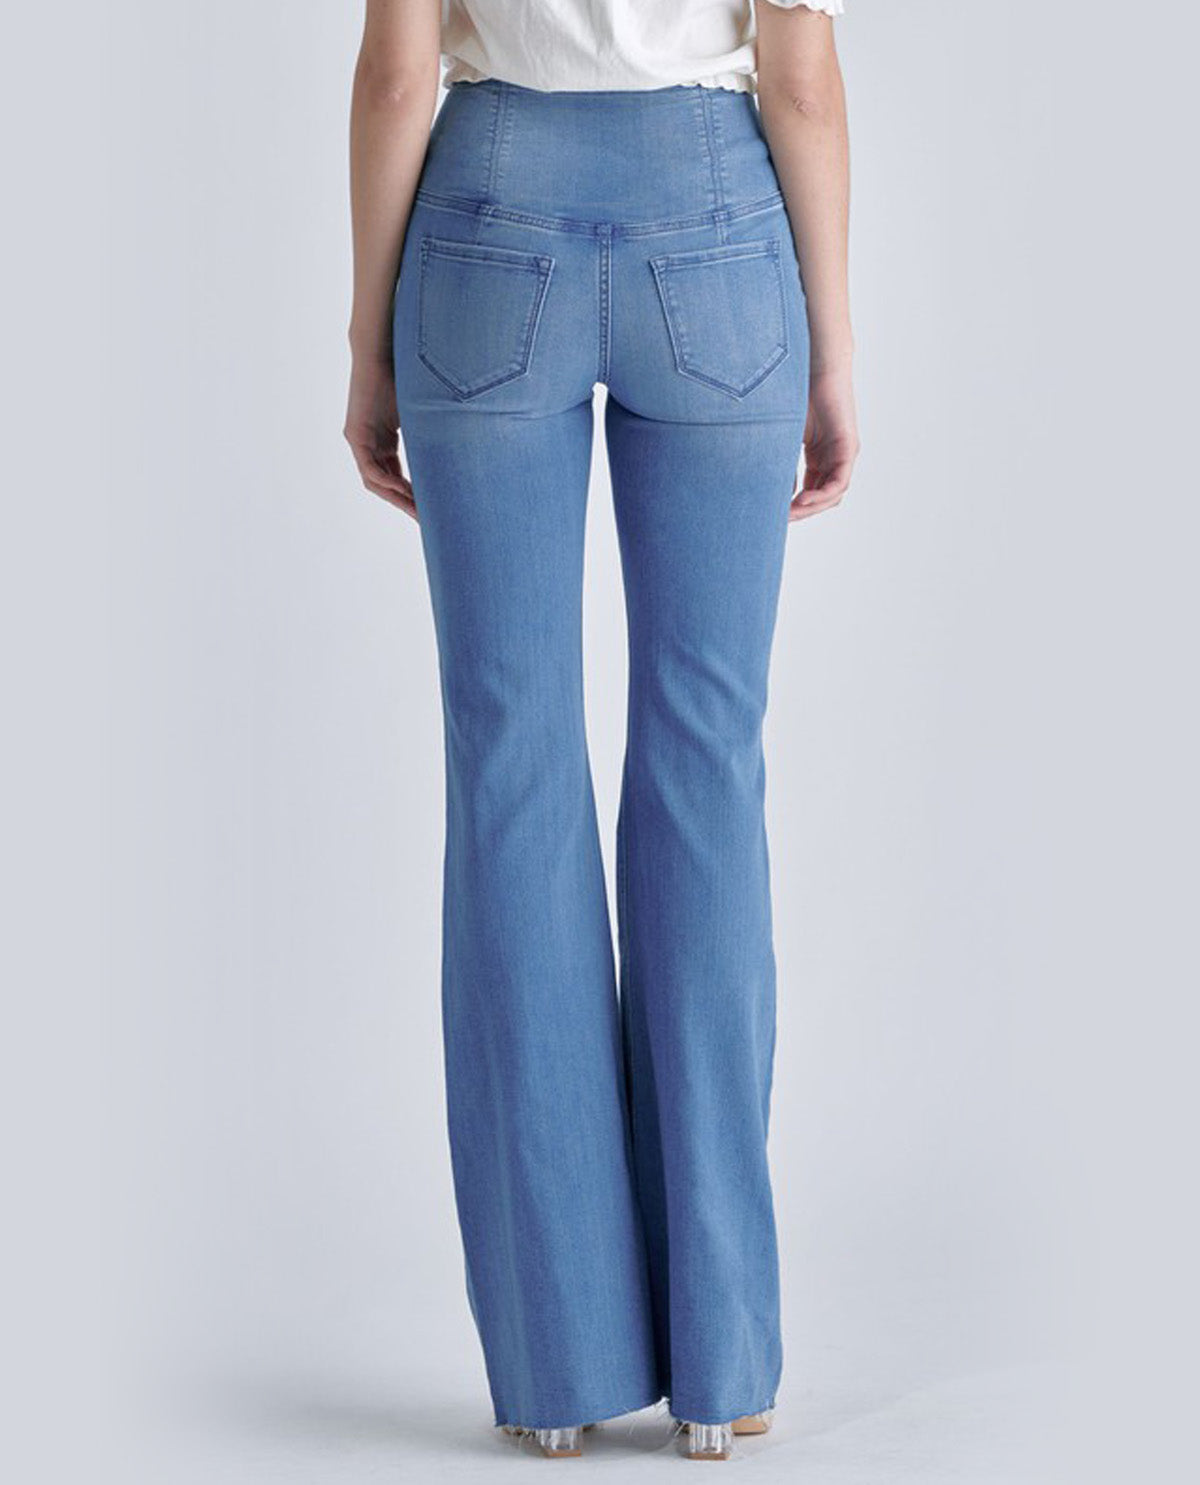 Cello High Rise Flare Jean with Criss Cross Wide Waistband Detail